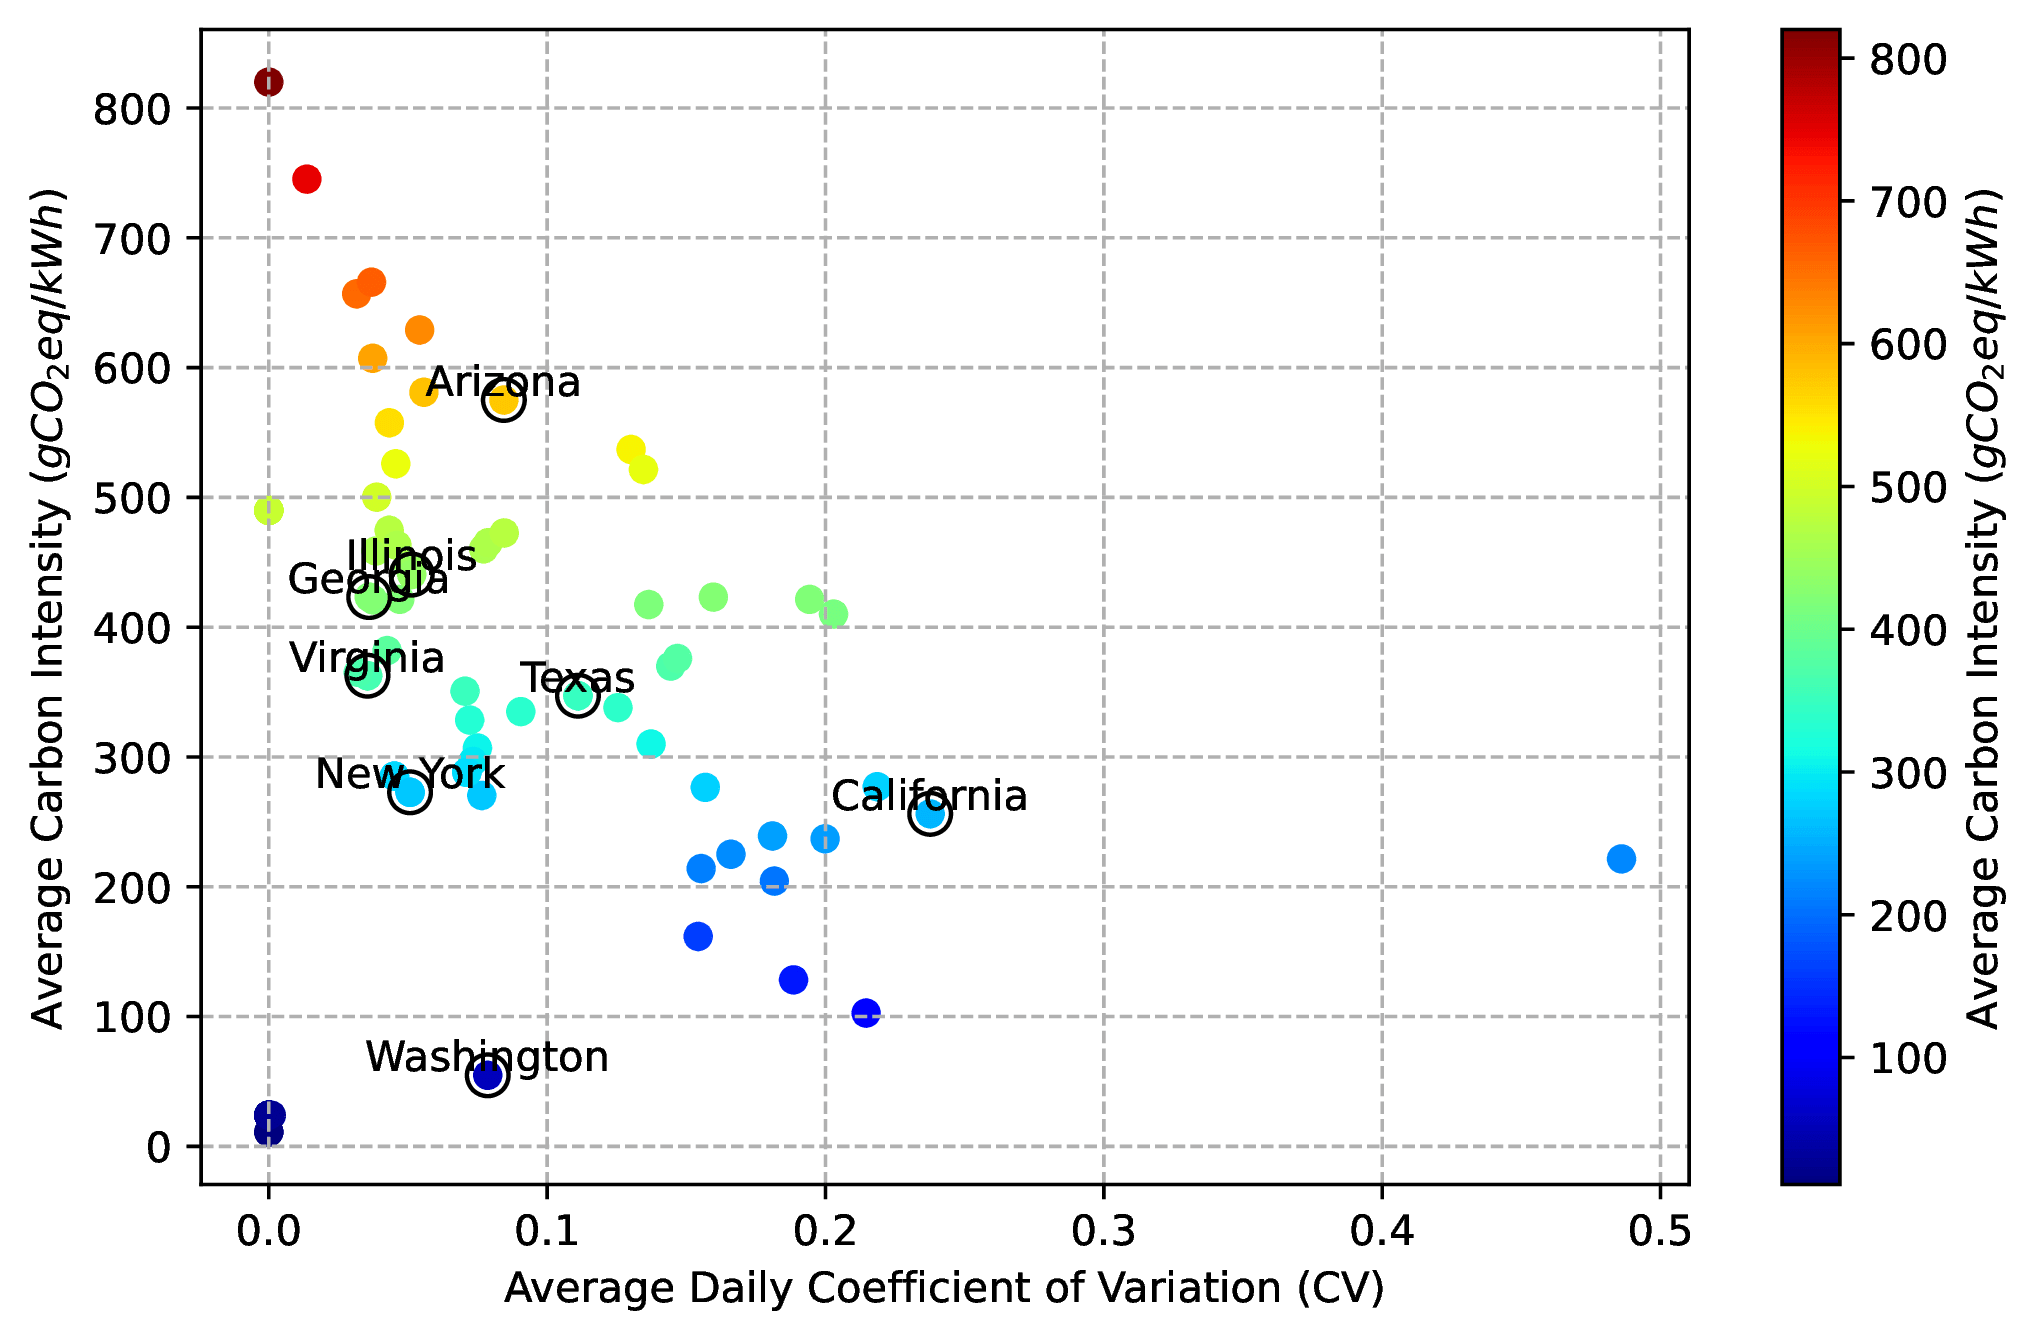 Average daily carbon intensity versus average daily coefficient of variation (CV) for the grid energy provided from US. Selected locations are remarked. High CV indicates more fluctuation, providing more opportunities for DRL agents to reduce carbon emissions. High average carbon intensity values offer greater potential gains for DRL agents.